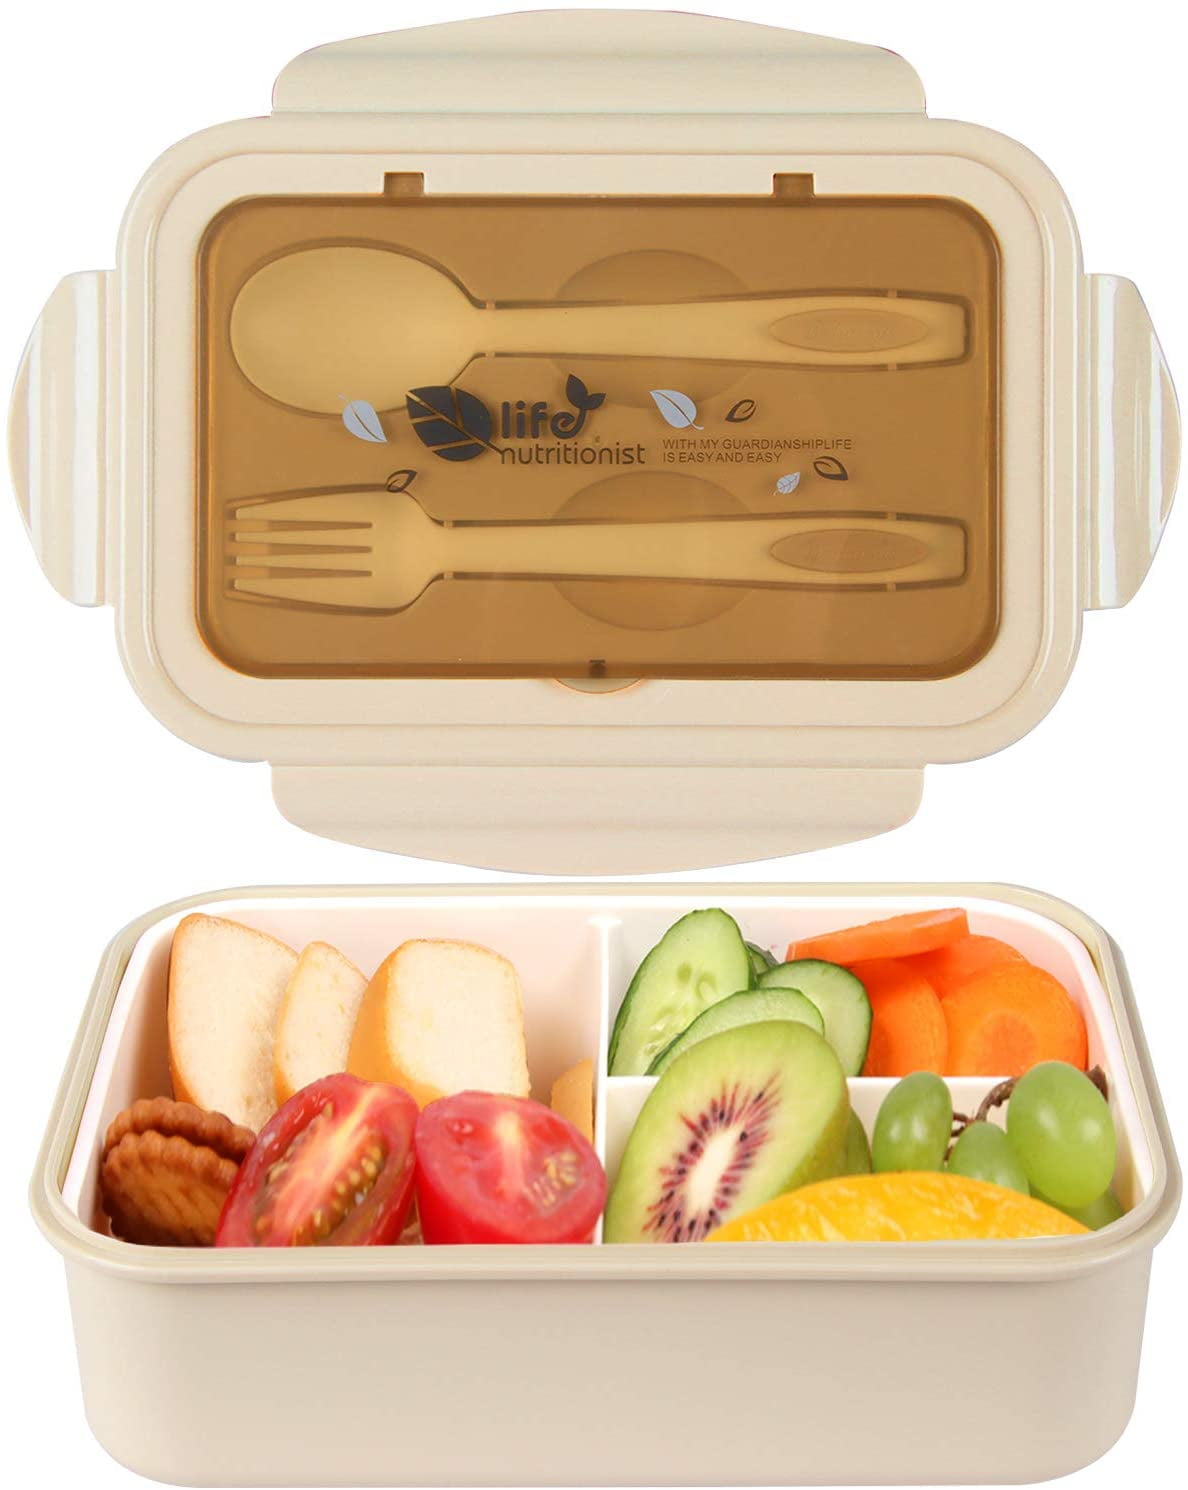 Leakproof Bento Boxes Containers for Kids and Adult Lunch Bento Box Set with 3 and 4 Compartments Microwave and Dishwasher Safe BPA-Free Lunch Box for Work School Travel 